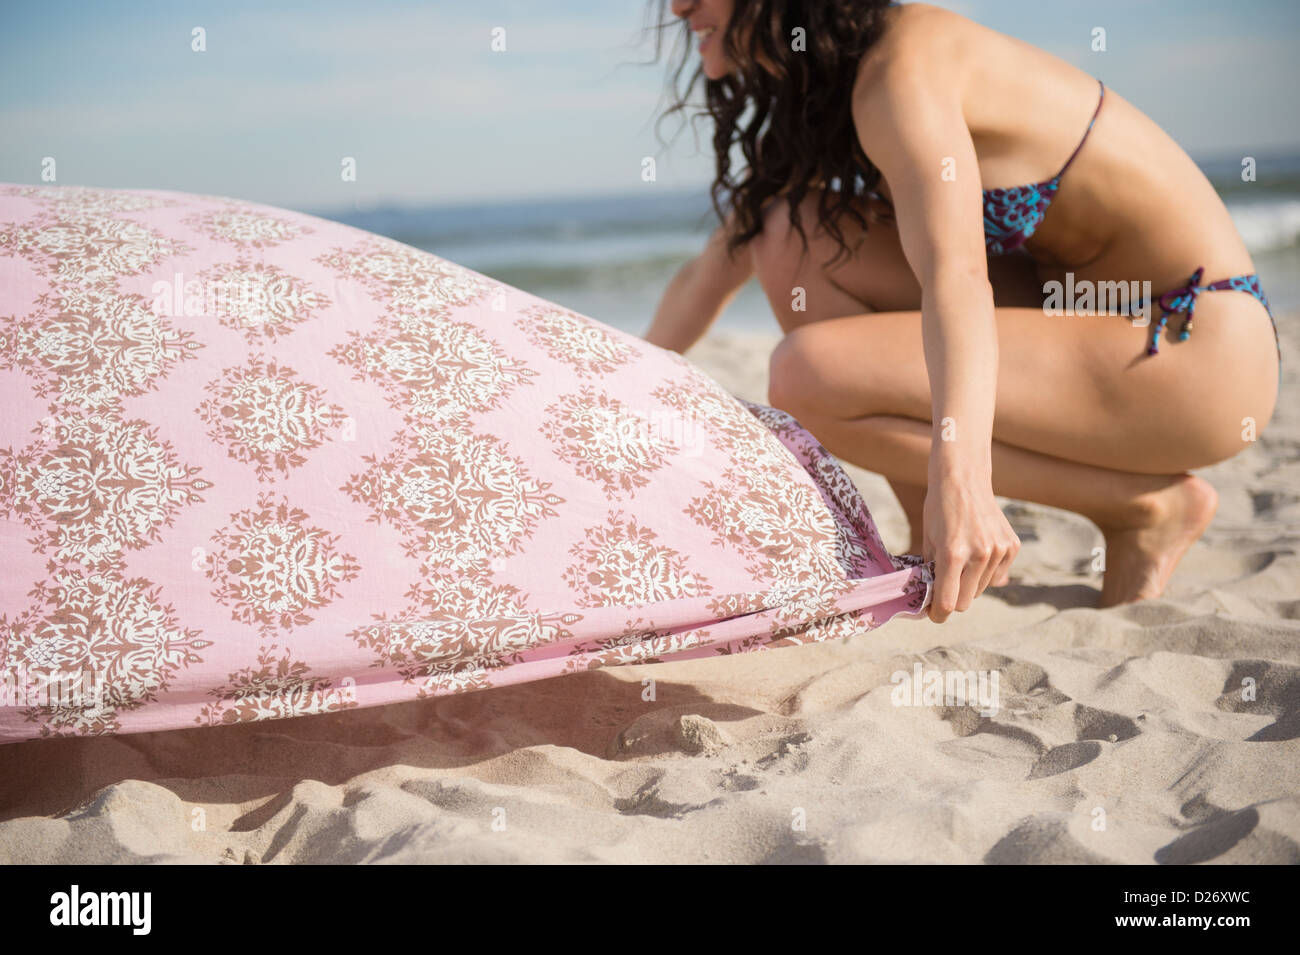 USA, New York State, Rockaway Beach, Woman on beach blanket Banque D'Images